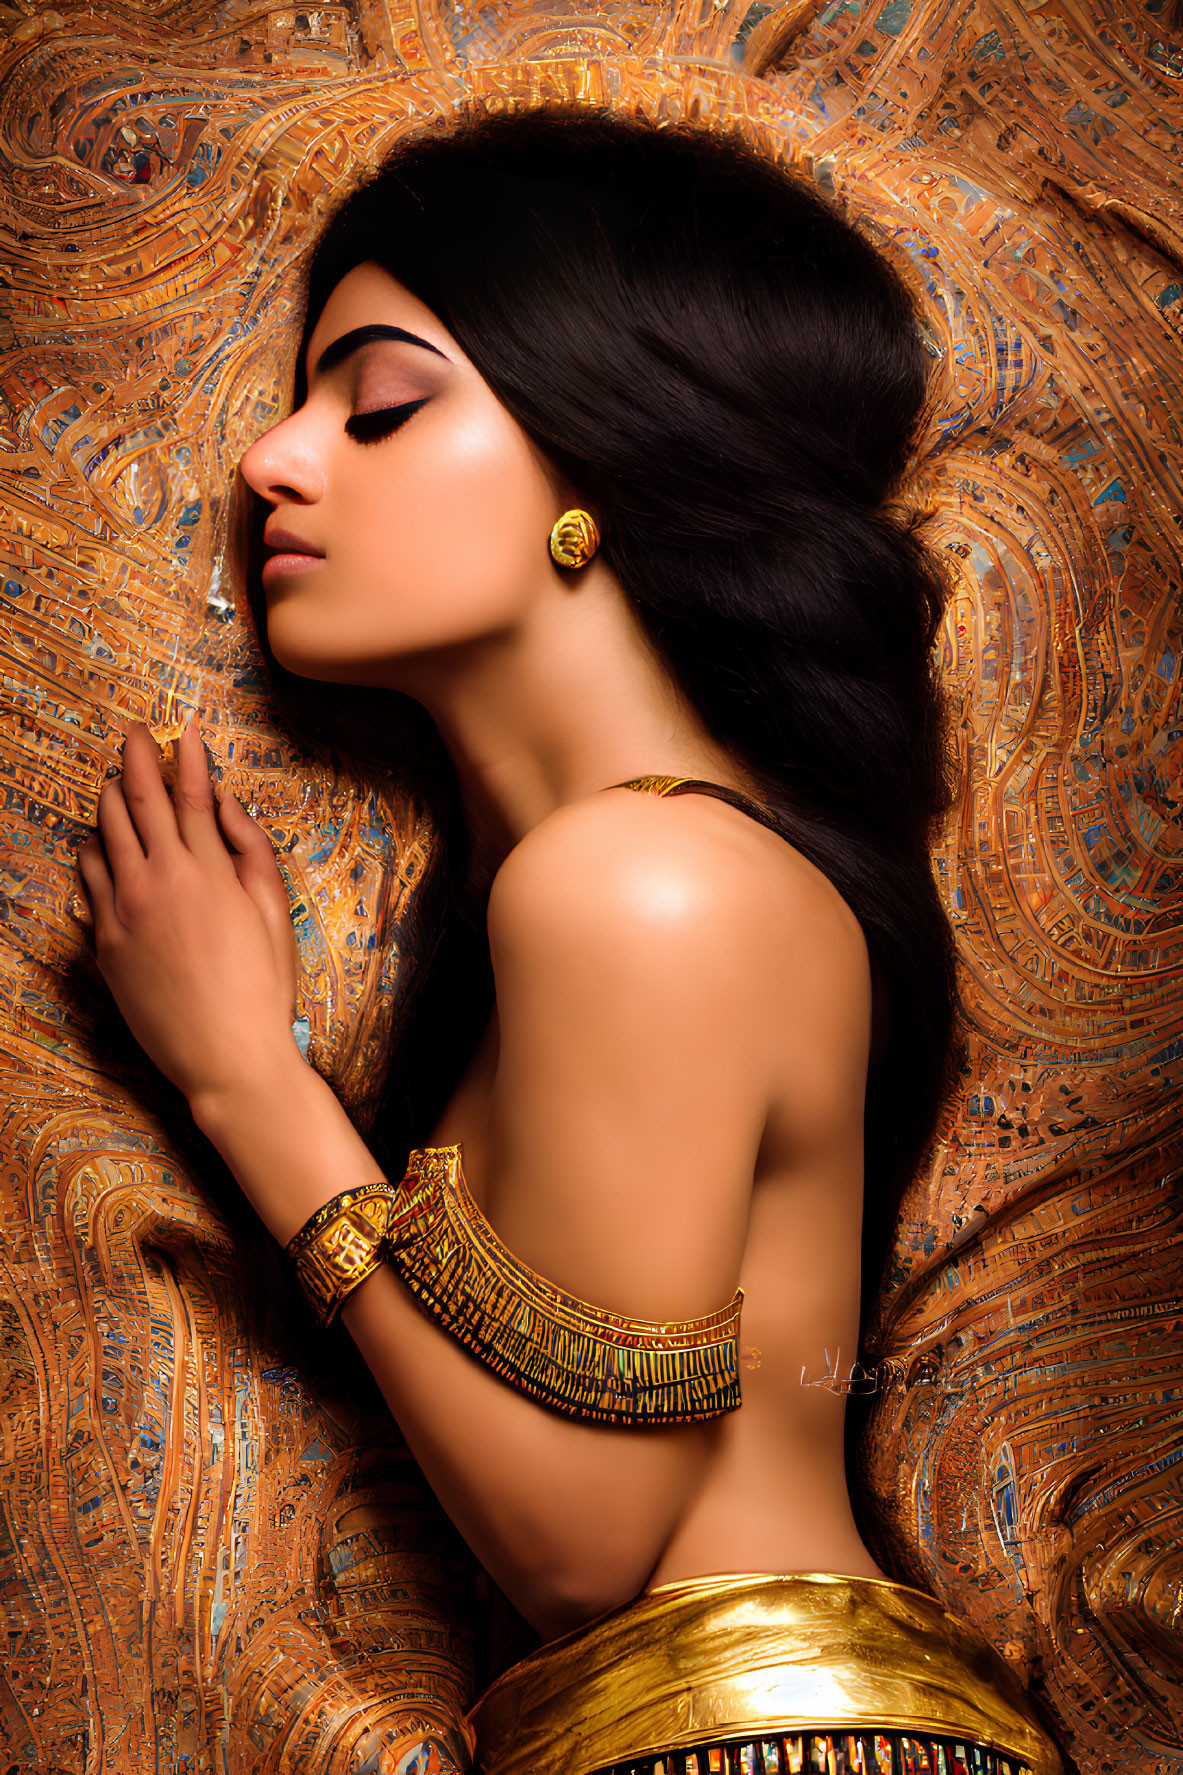 Dark-haired woman in golden jewelry against ornate backdrop